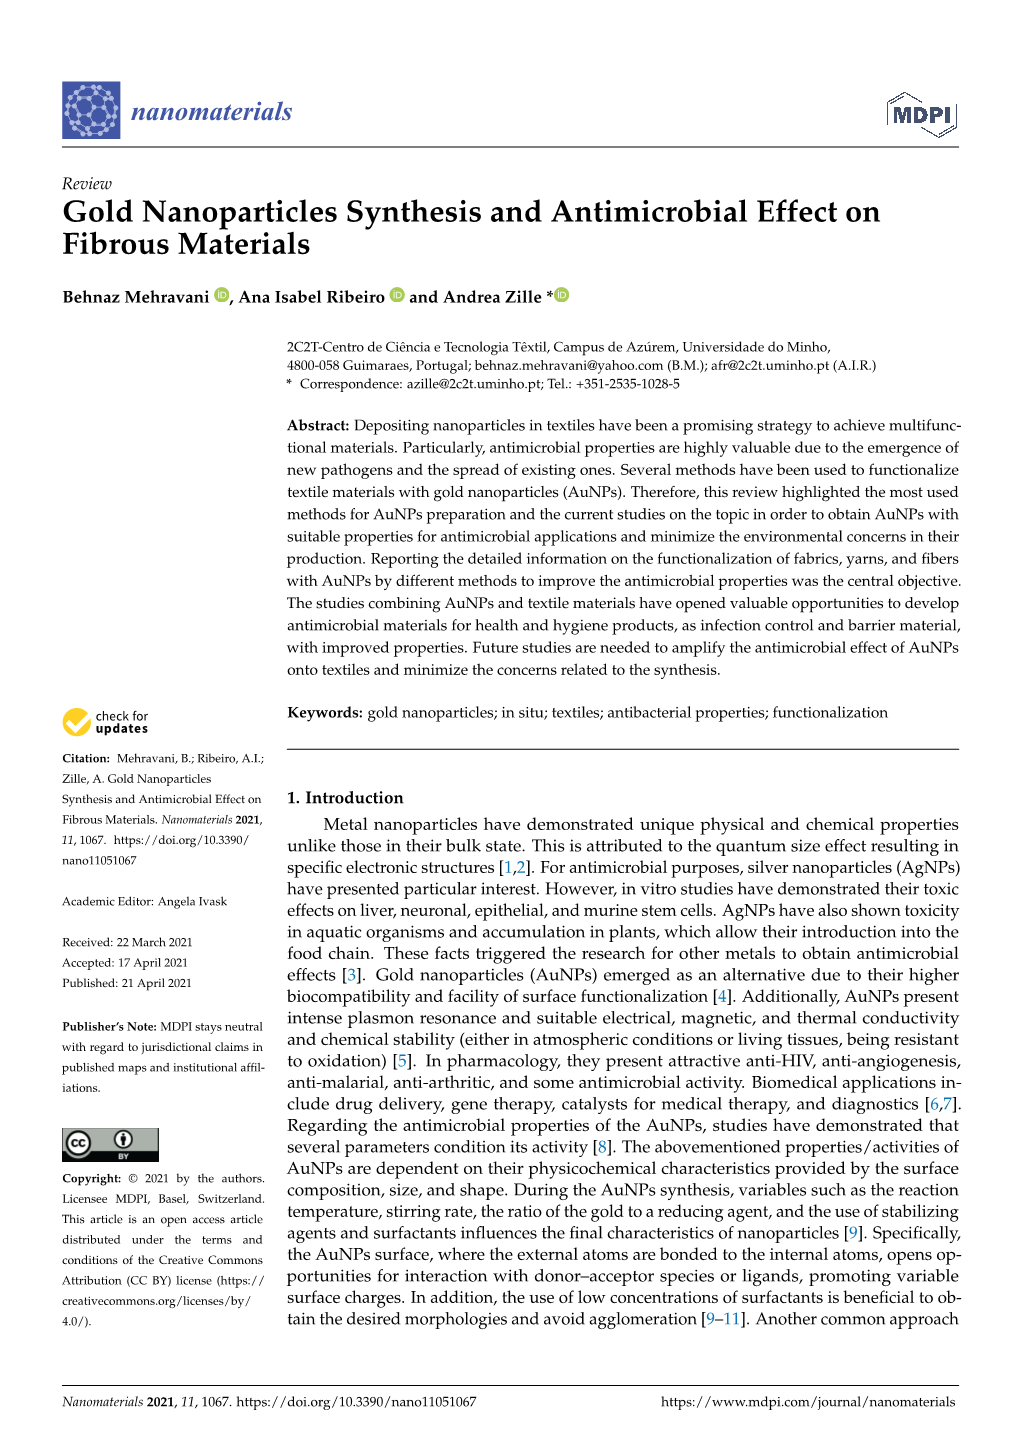 Gold Nanoparticles Synthesis and Antimicrobial Effect on Fibrous Materials